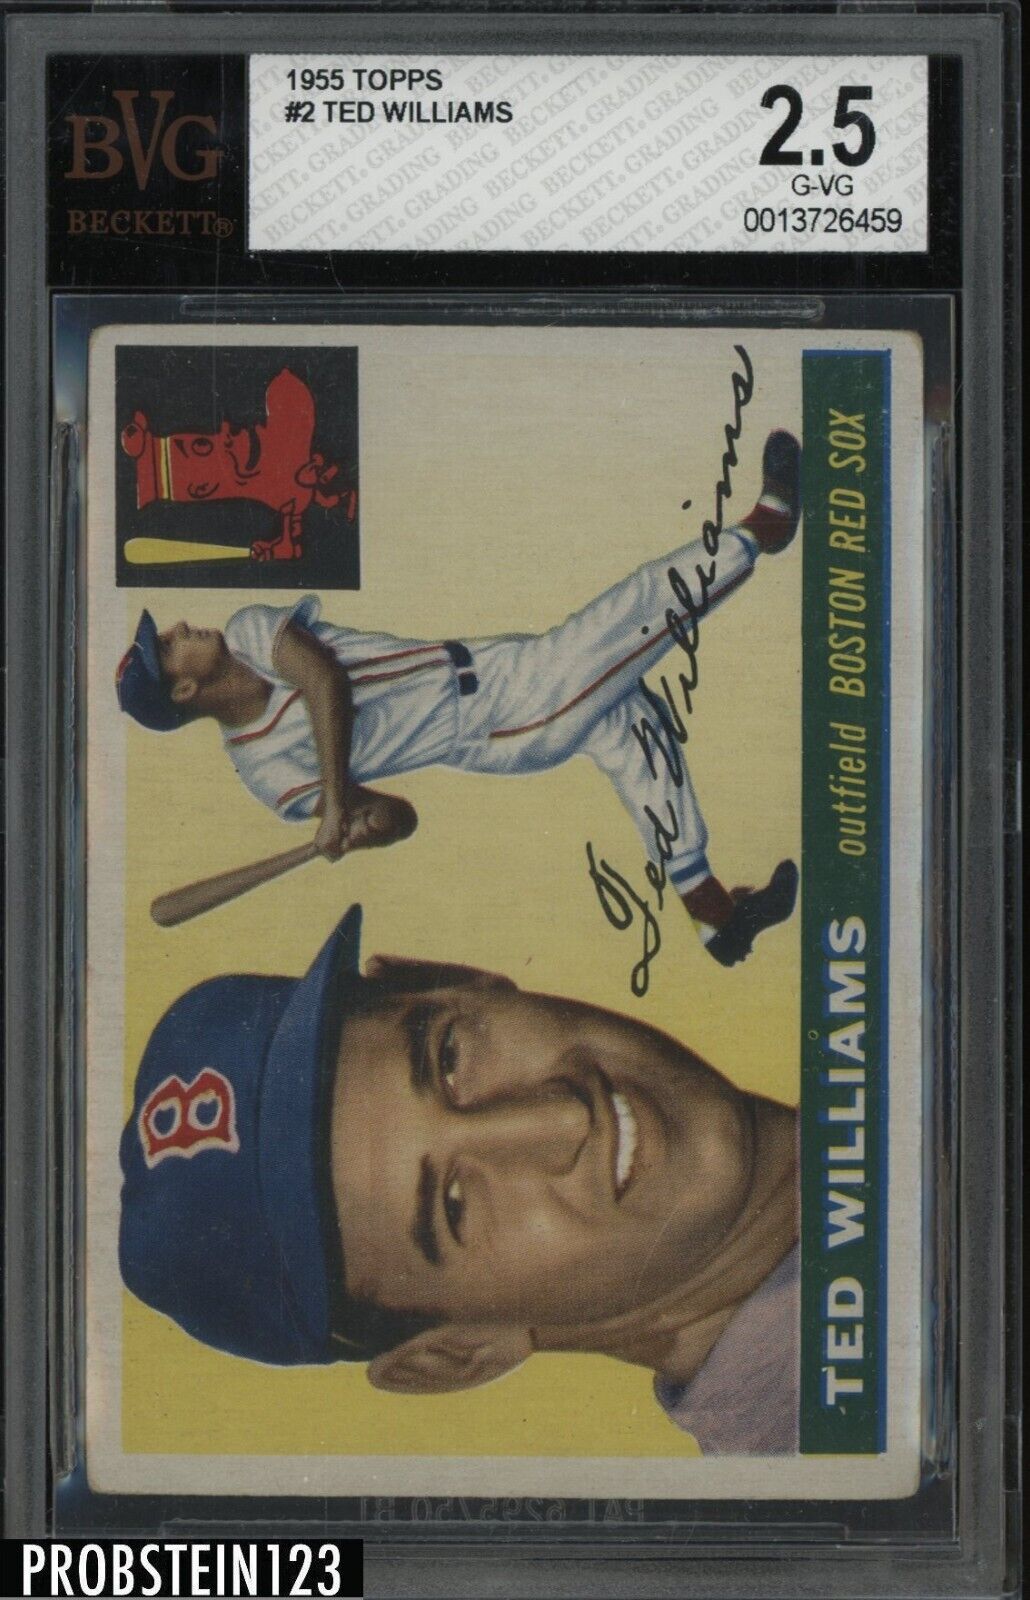 1955 Topps #2 Ted Williams Boston Red Sox HOF BVG 2.5